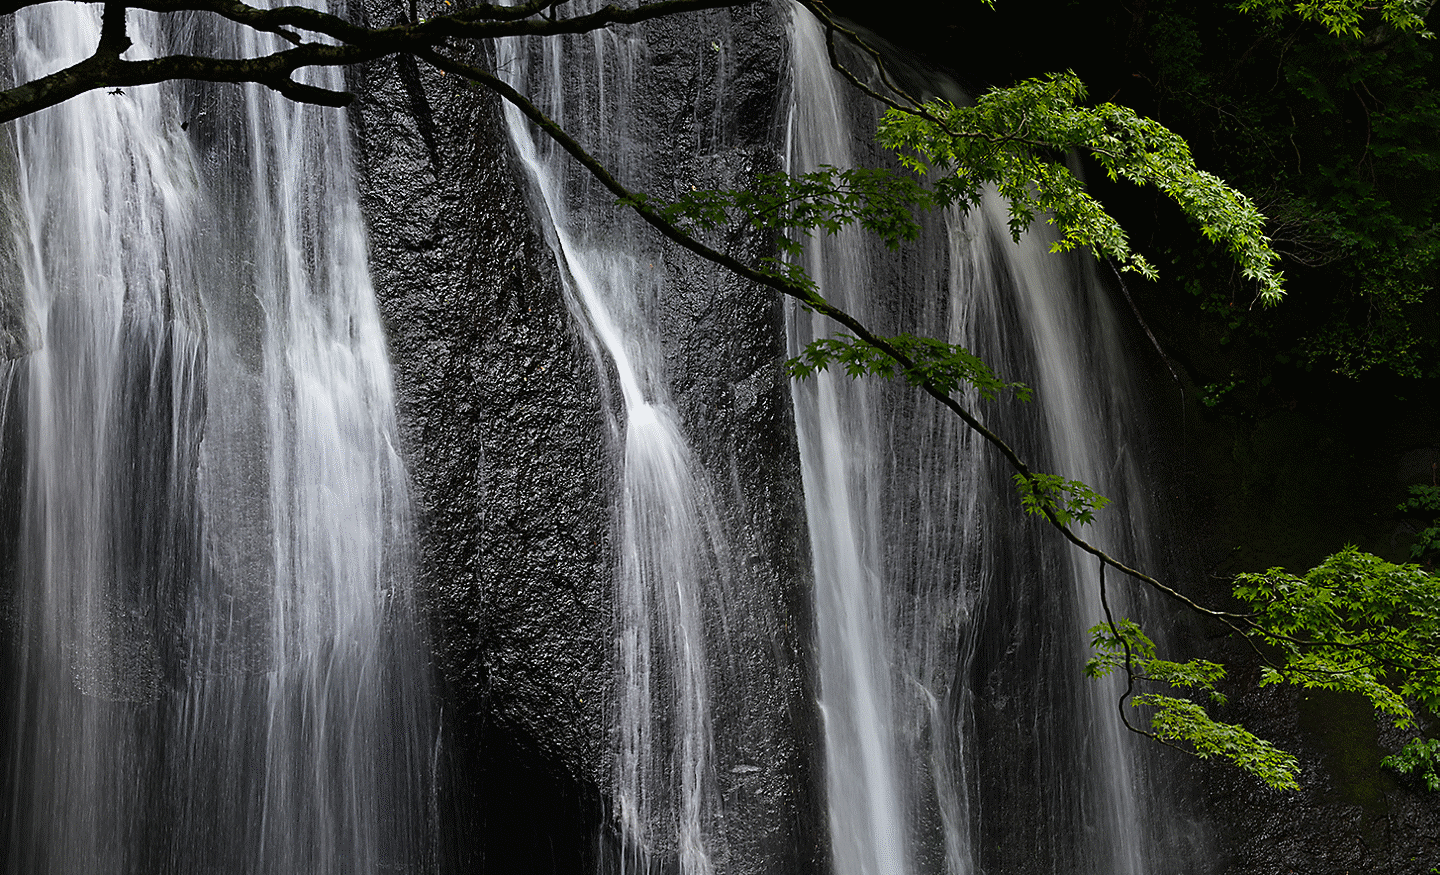 Image of a waterfall and trees